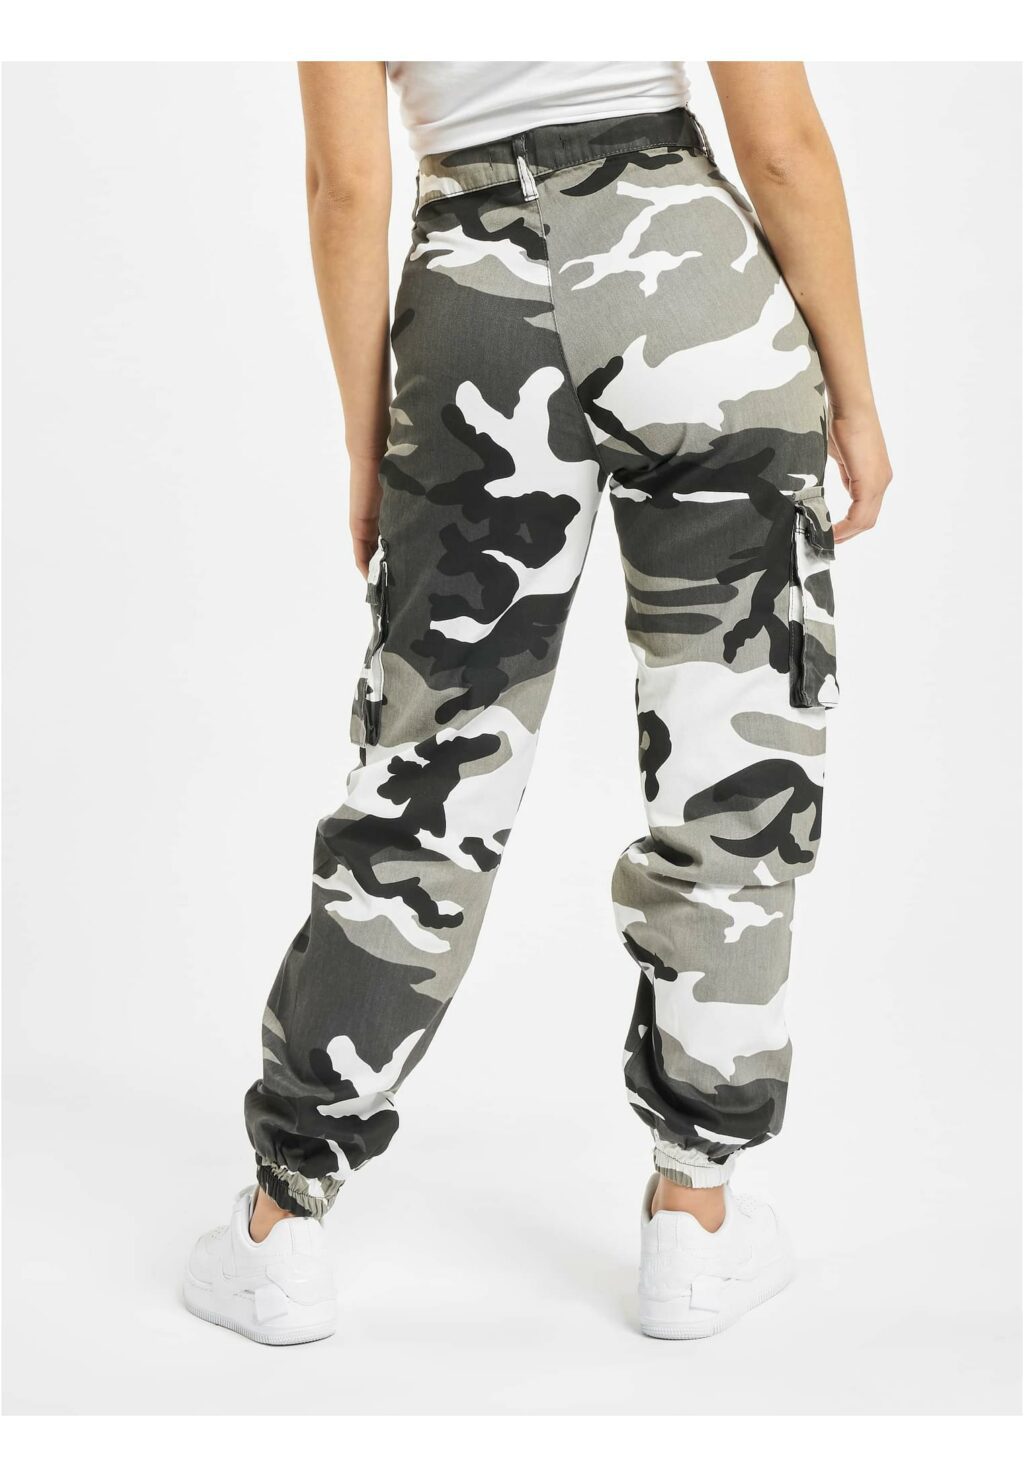 Ruby Cargopants camouflage DFLCP011